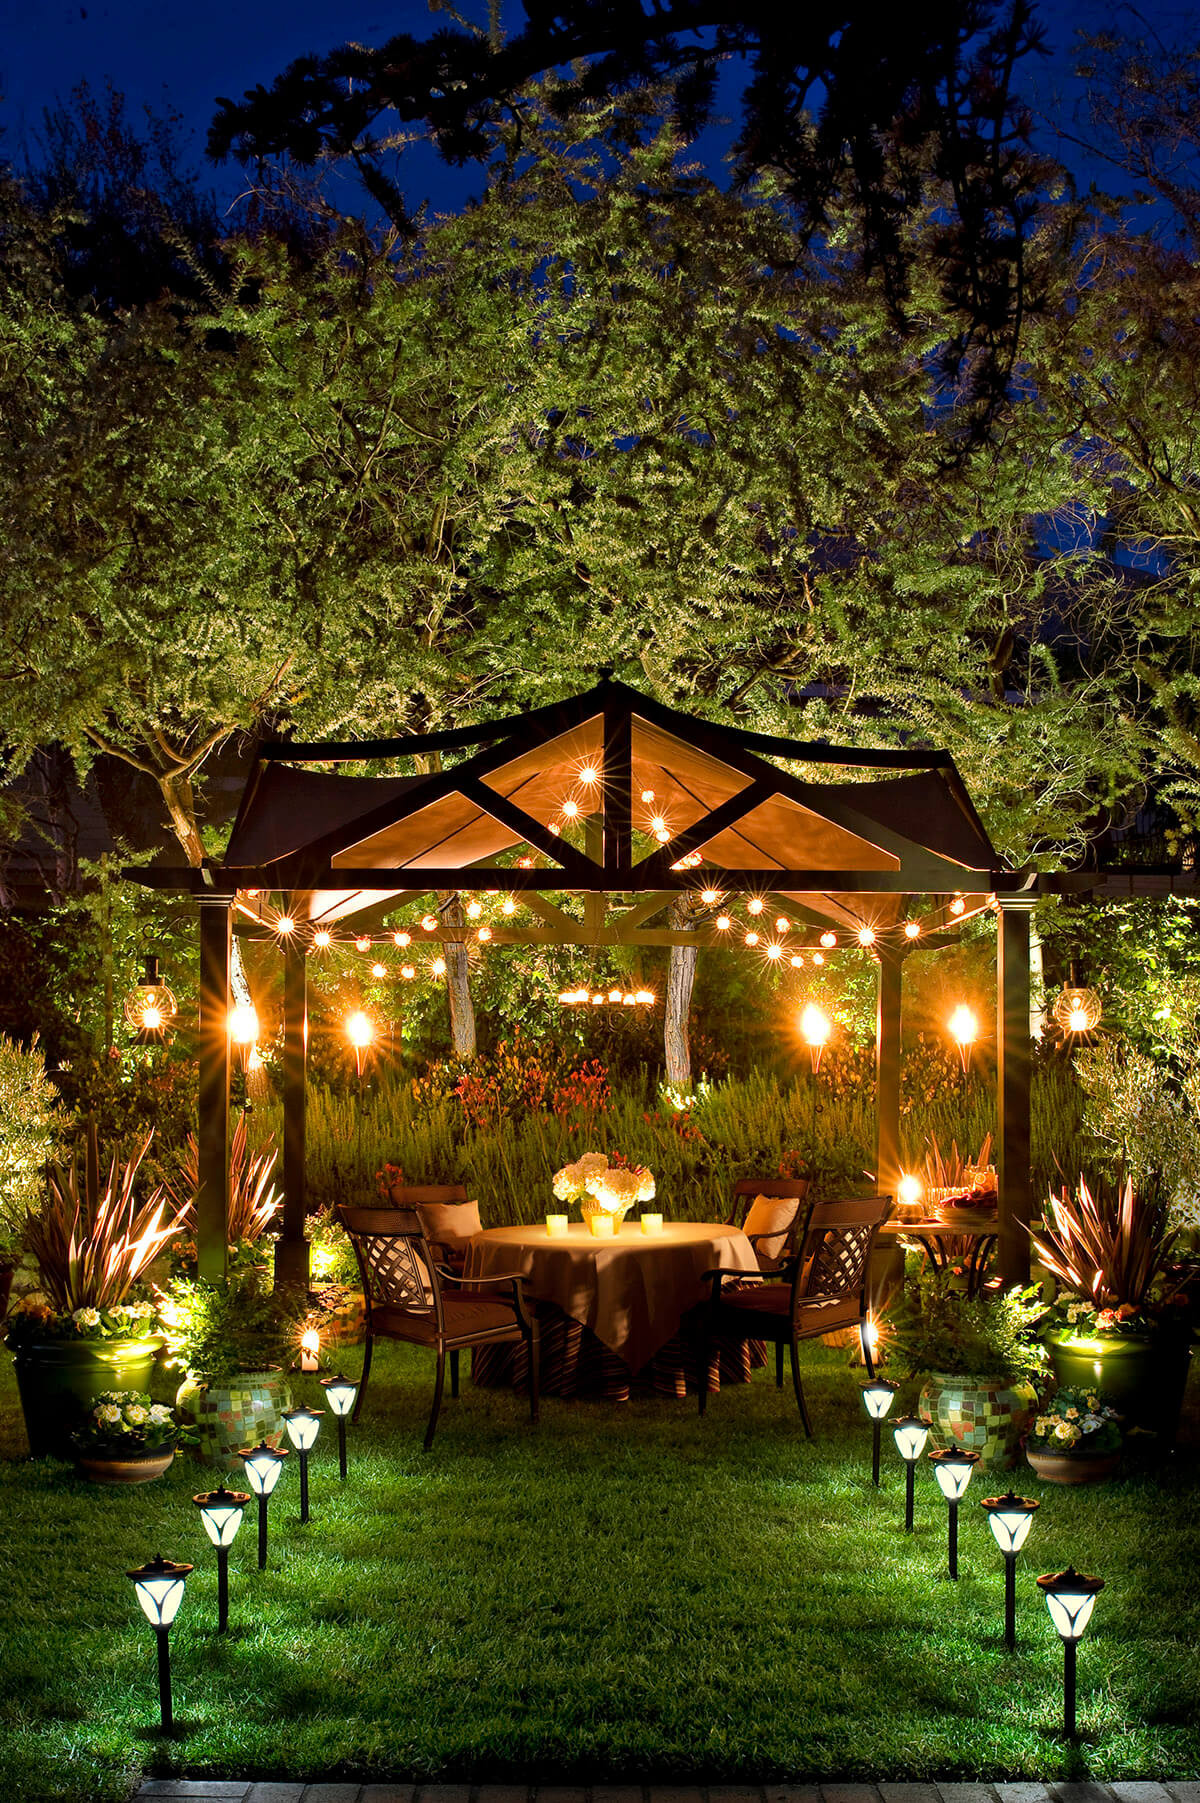 Backyard Lighting Ideas For A Party
 27 Best Backyard Lighting Ideas and Designs for 2017